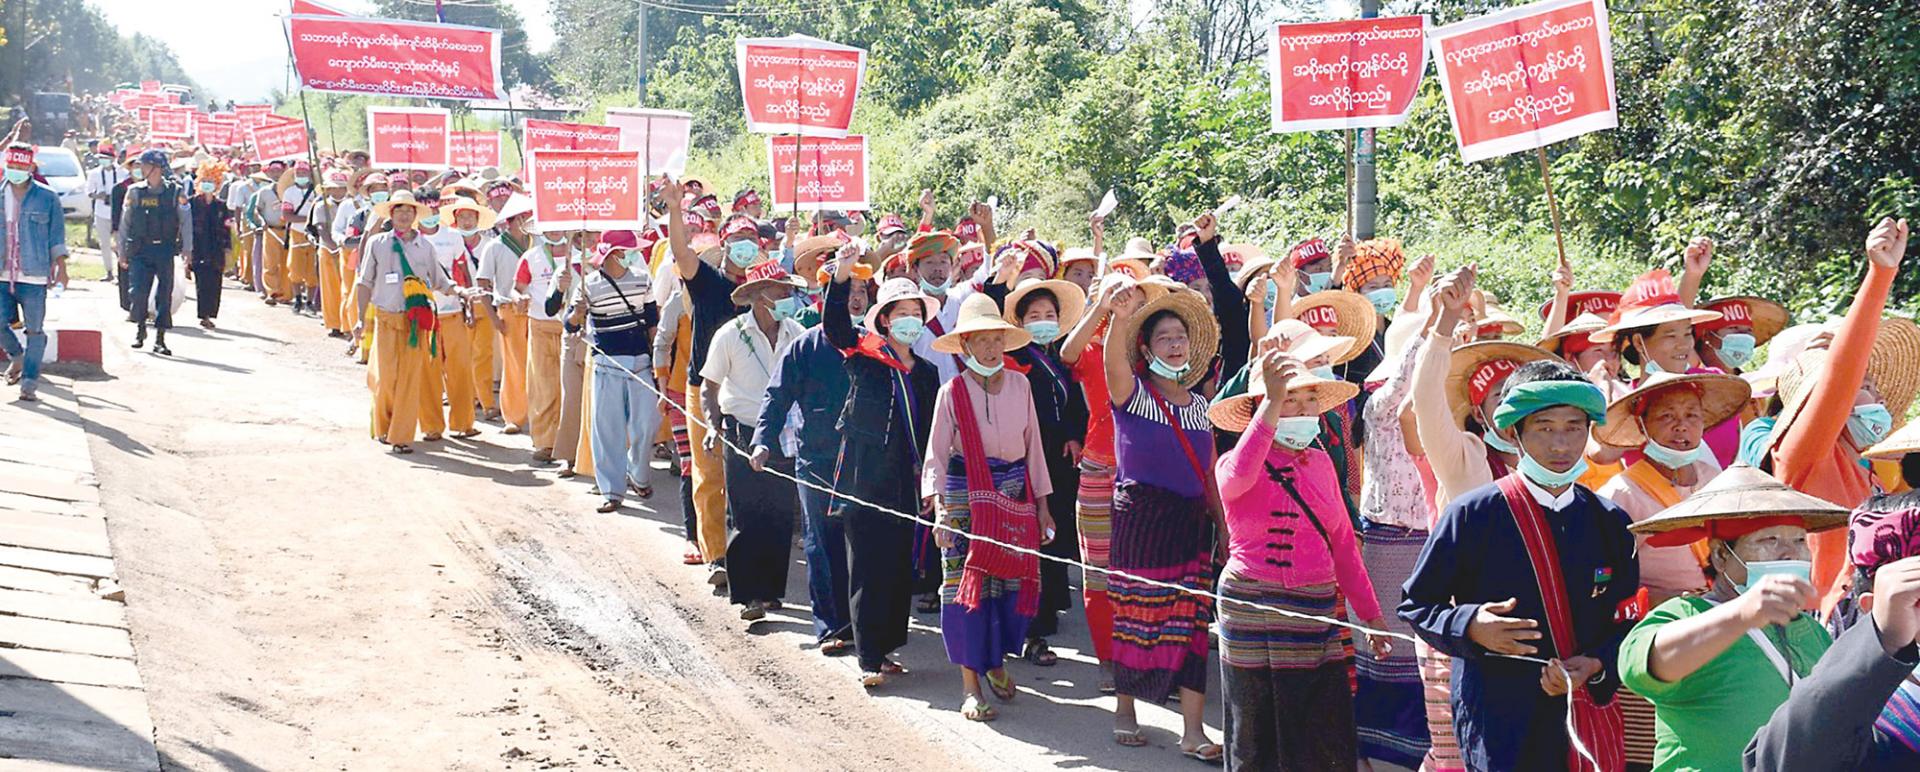 Over 1,500 Tikyit residents including the ethnics held second protest over closure of Tikyit coal-fired power plant